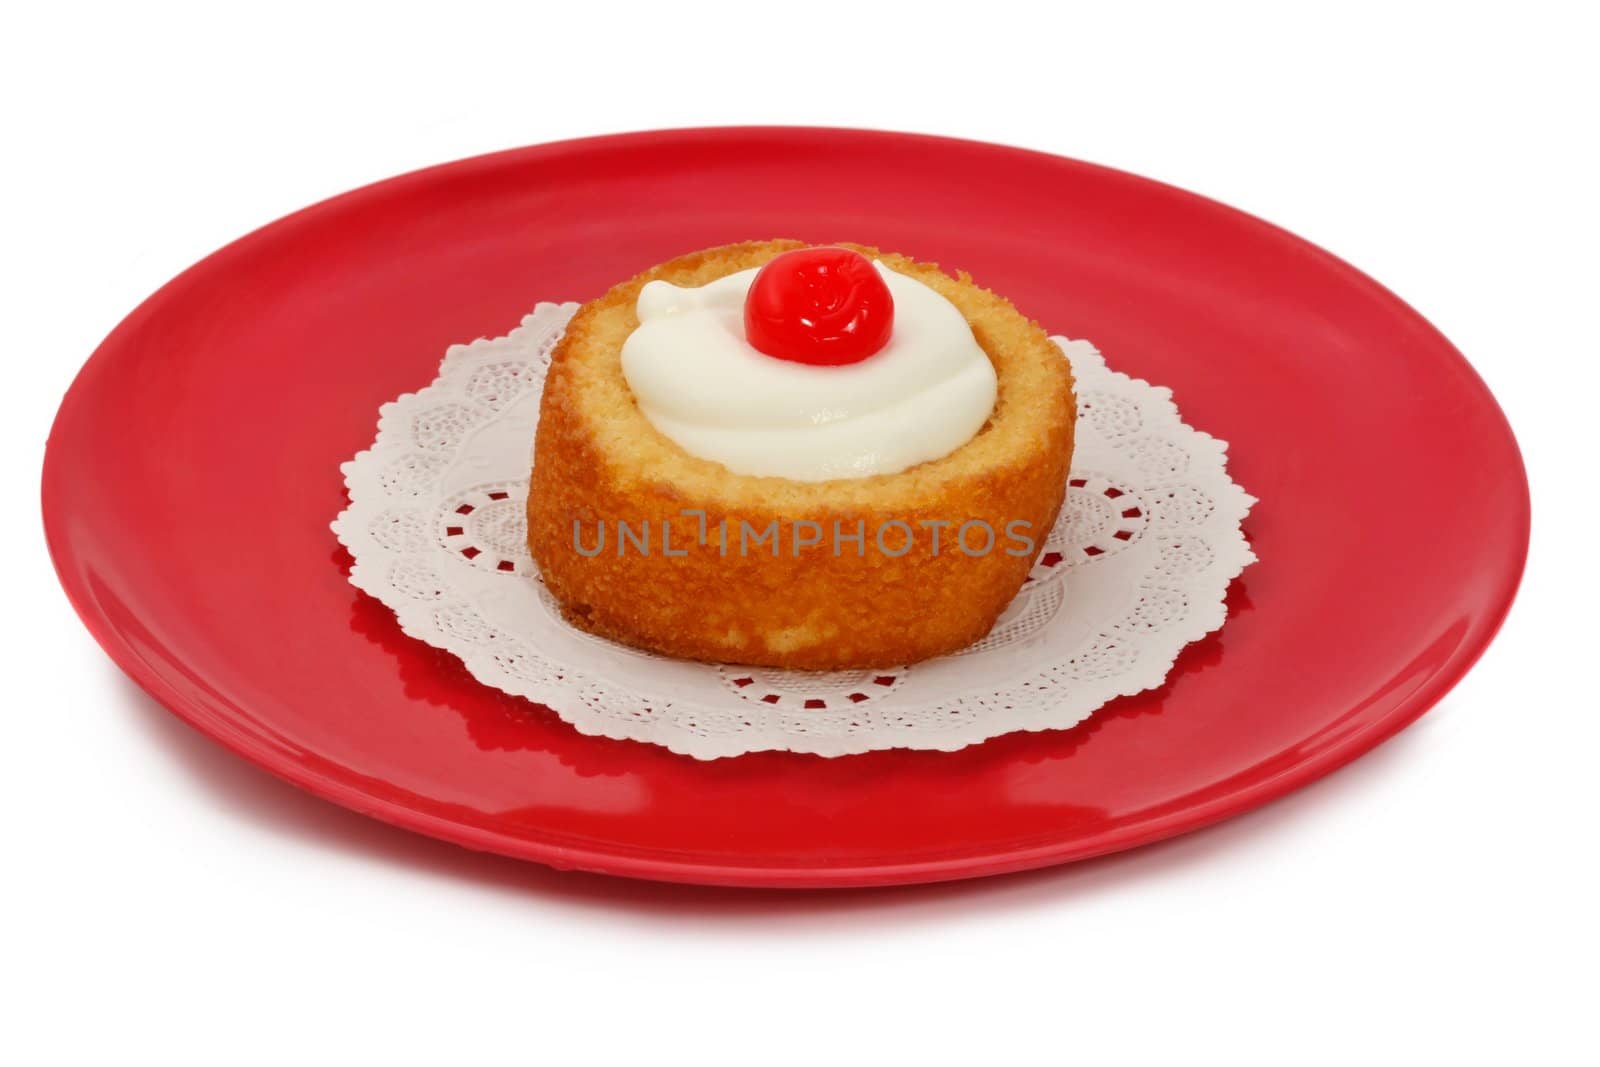 cream shortcake with cherry, on red plate,  isolated on white background